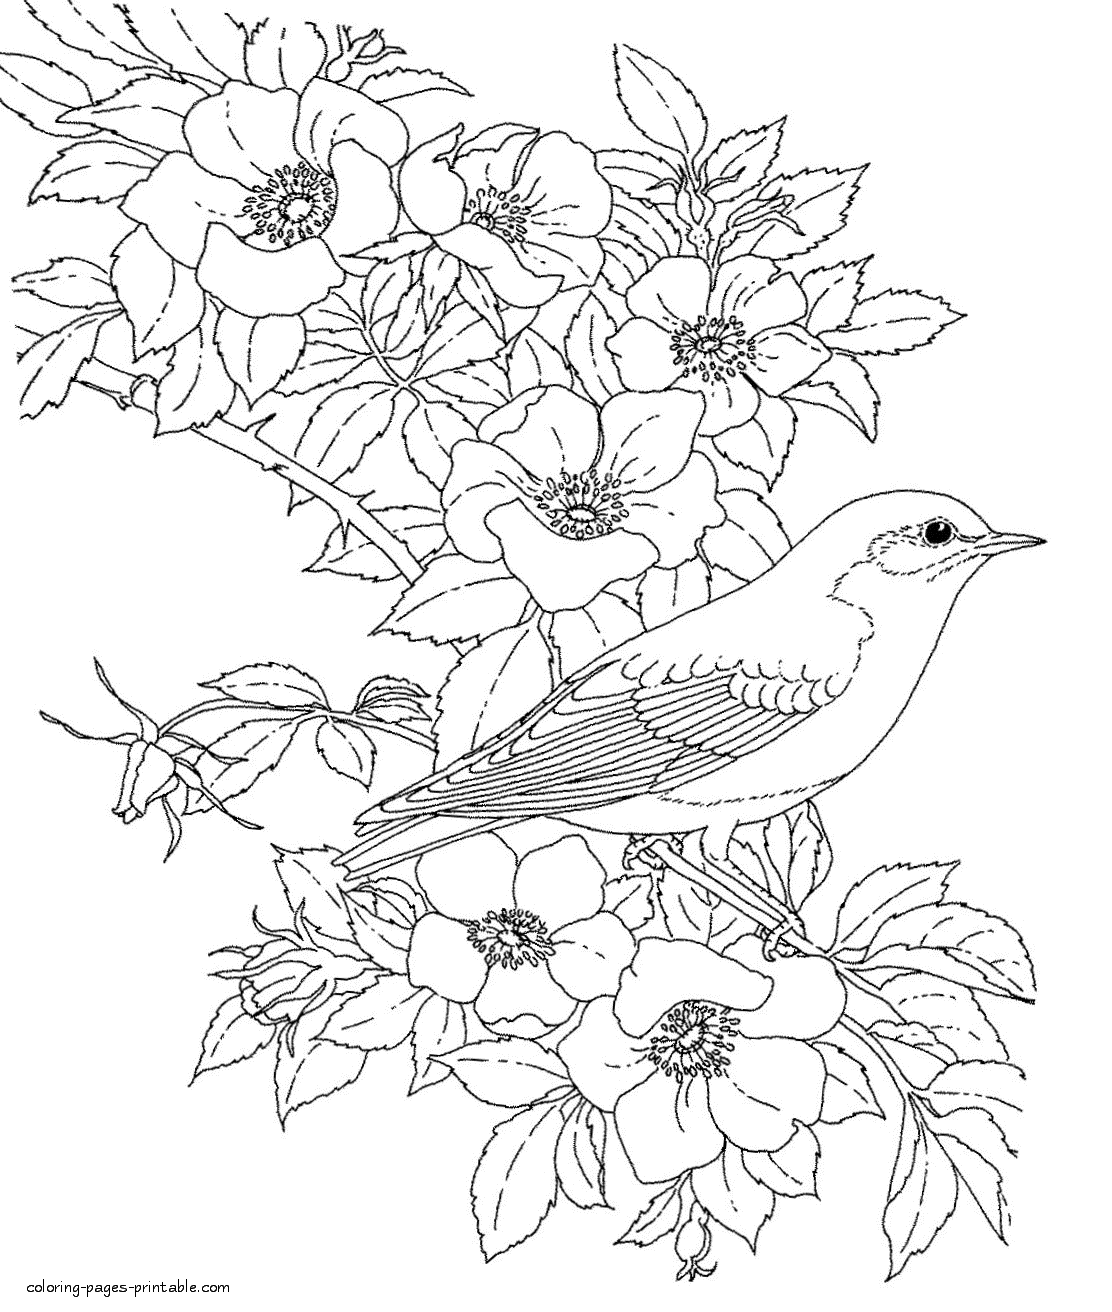 Coloring Pages For Adults. Bird And Flowers || COLORING-PAGES-PRINTABLE.COM